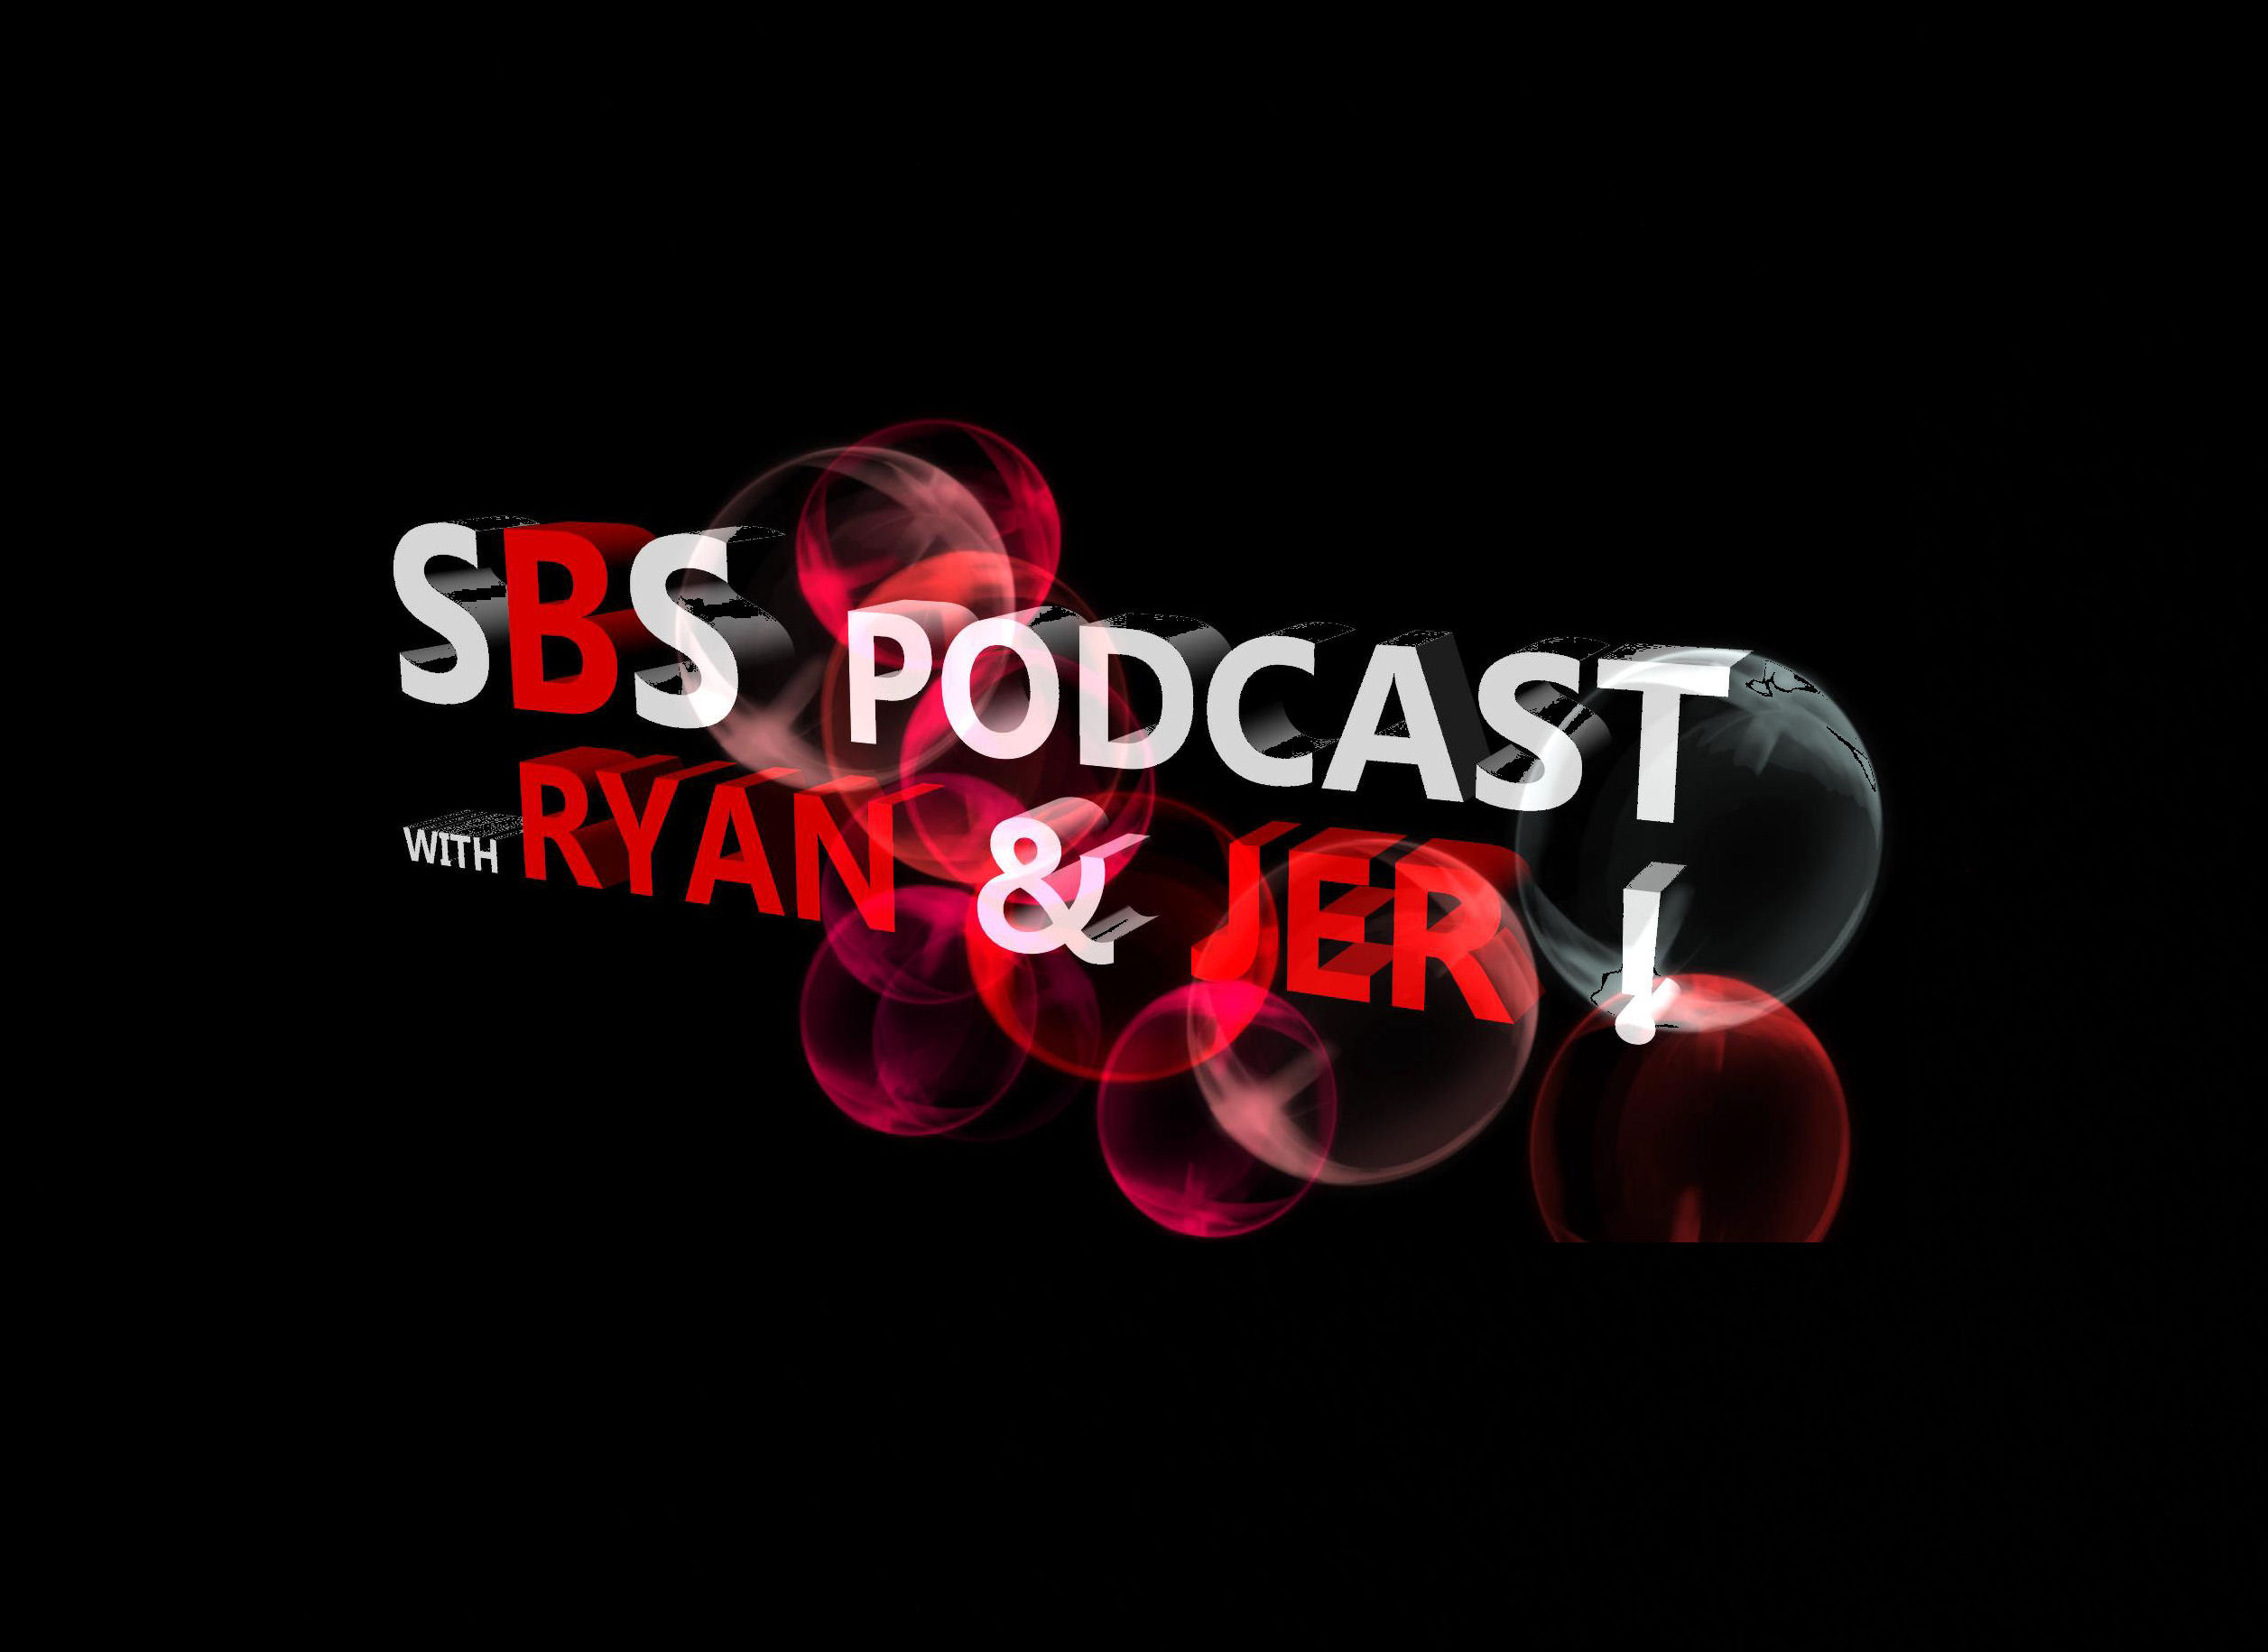  SBS Podcast With Ryan & Jer 008